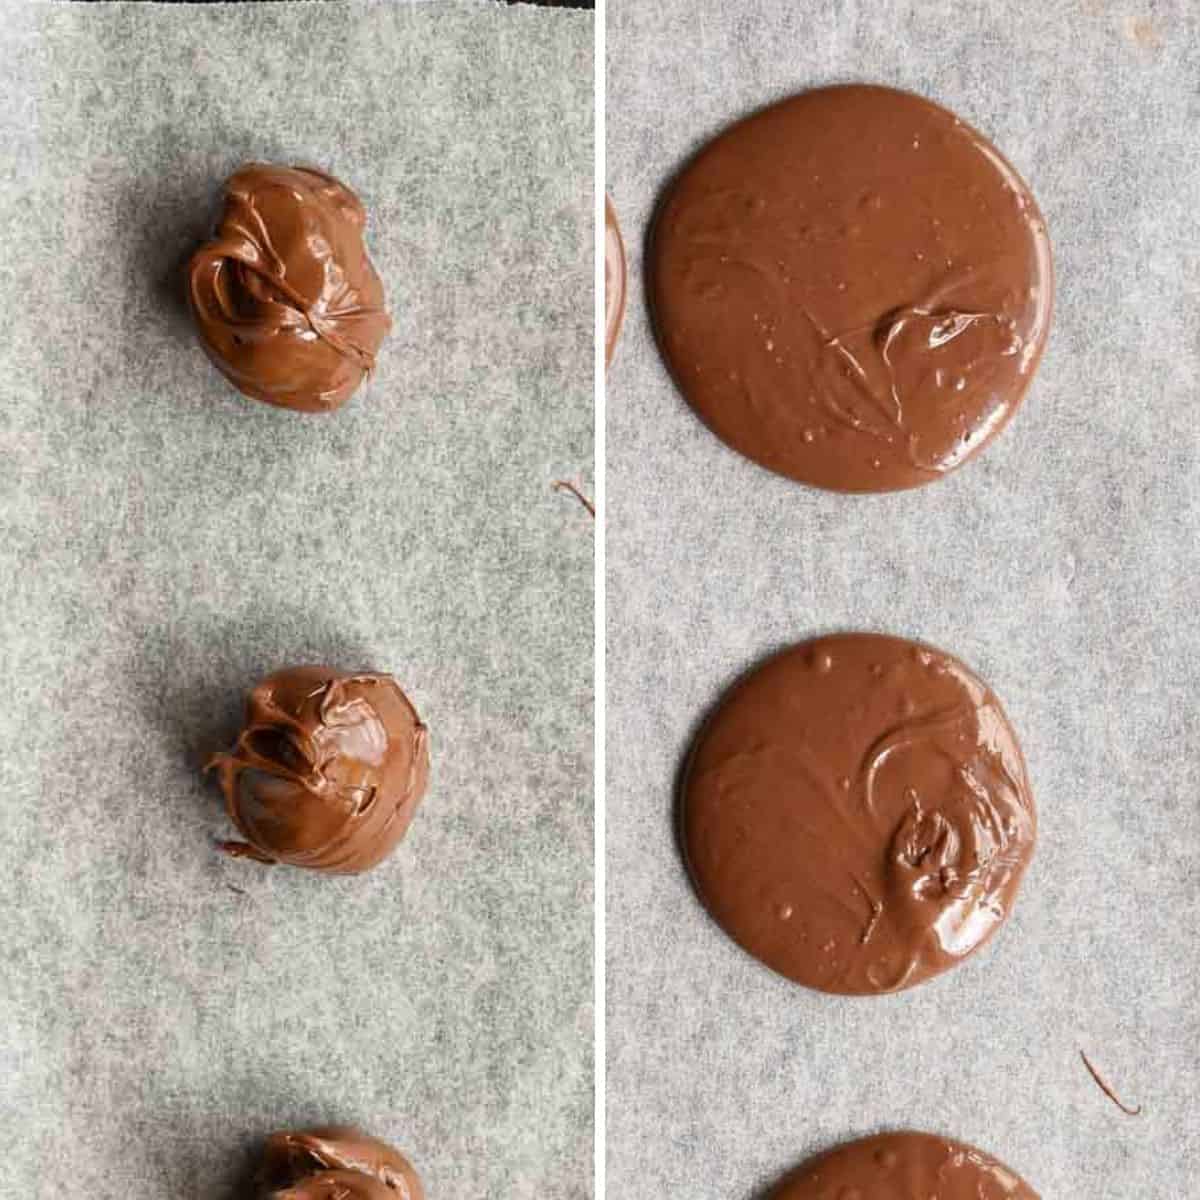 On the left is spoonfuls of nutella and on the right is flattened rounds of nutella.